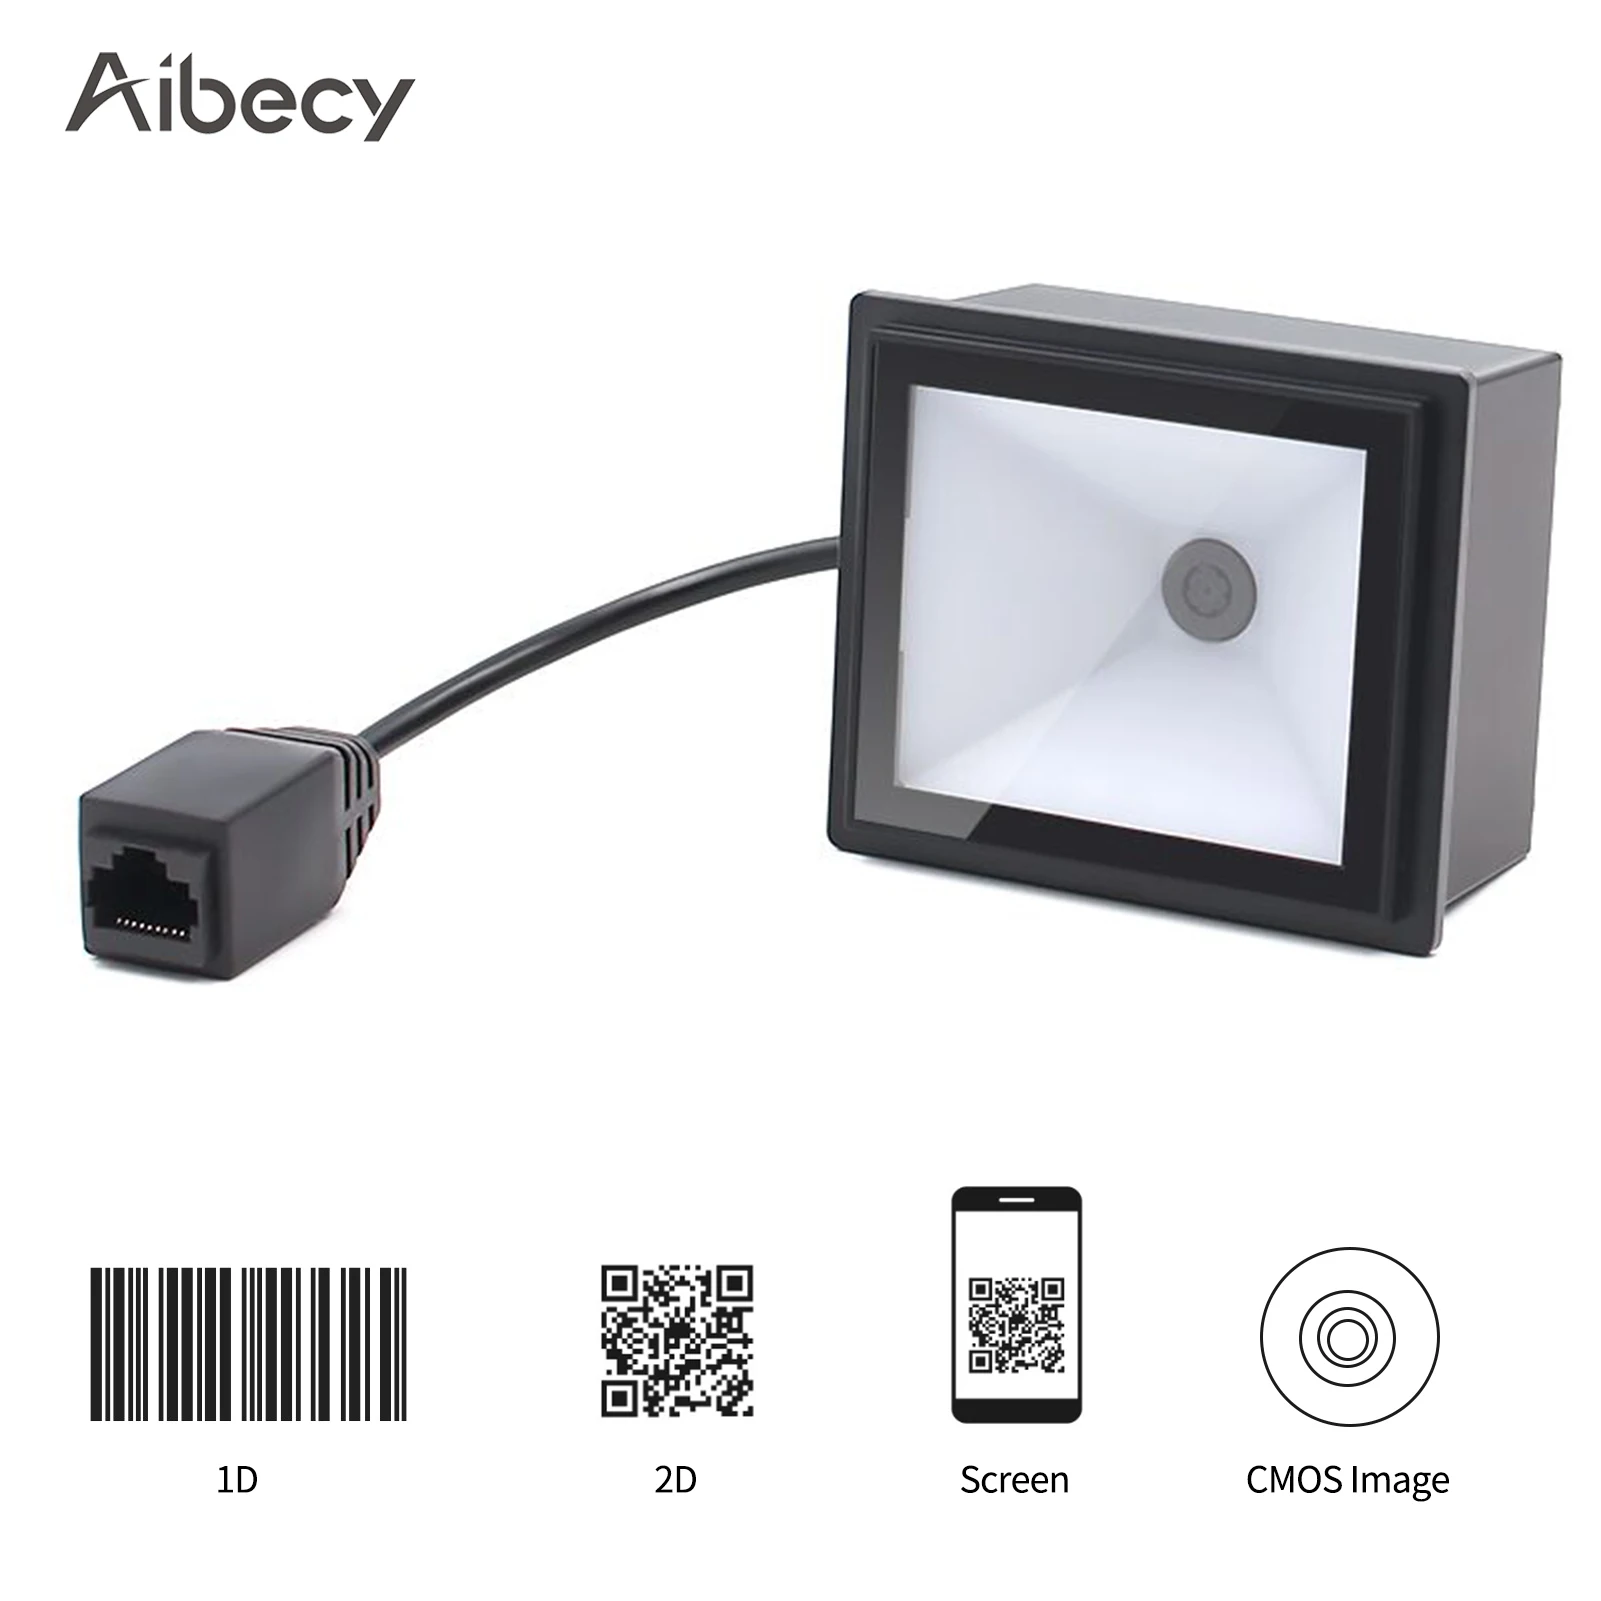 

Aibecy Embedded 1D 2D QR Barcode Scanner Module CMOS Images Auto-scan Wired Fixed Mount Bar Code Reader Support for Screen Scan